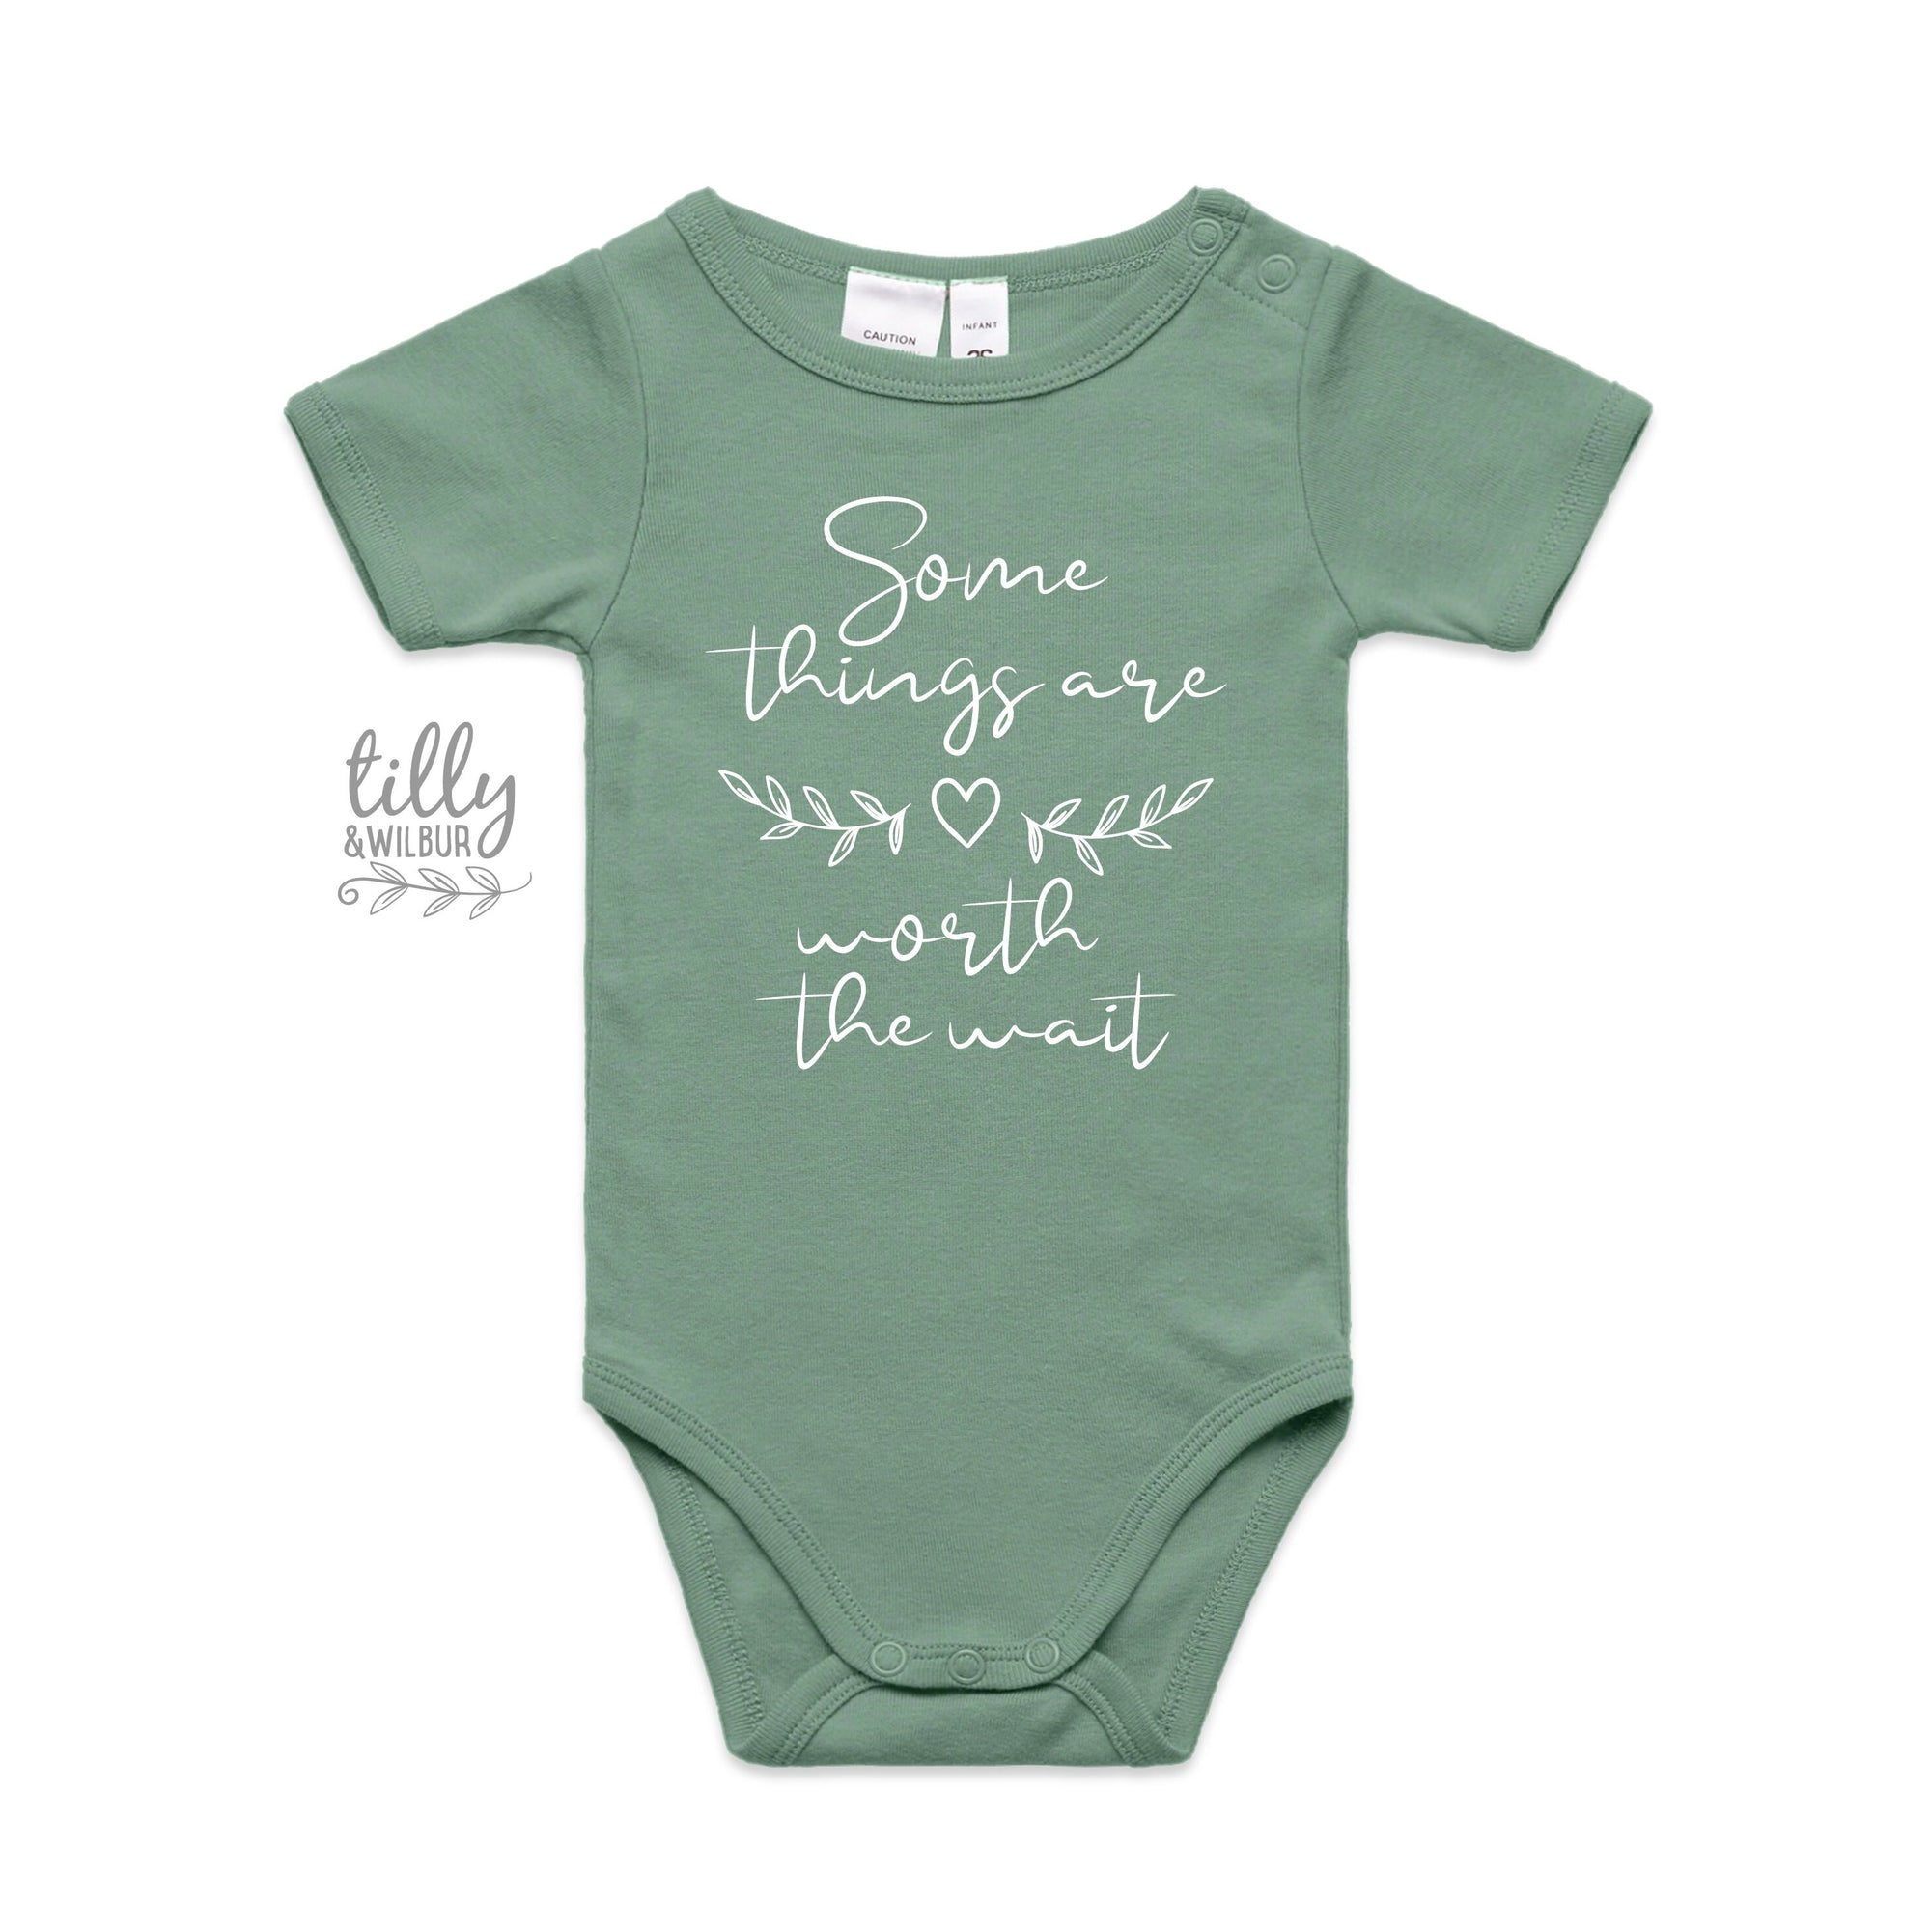 Some Things Are Worth The Wait Baby Bodysuit, Pregnancy Announcement, Little Miracle Baby, Worth The Long Wait, Baby Shower Gift, Newborn